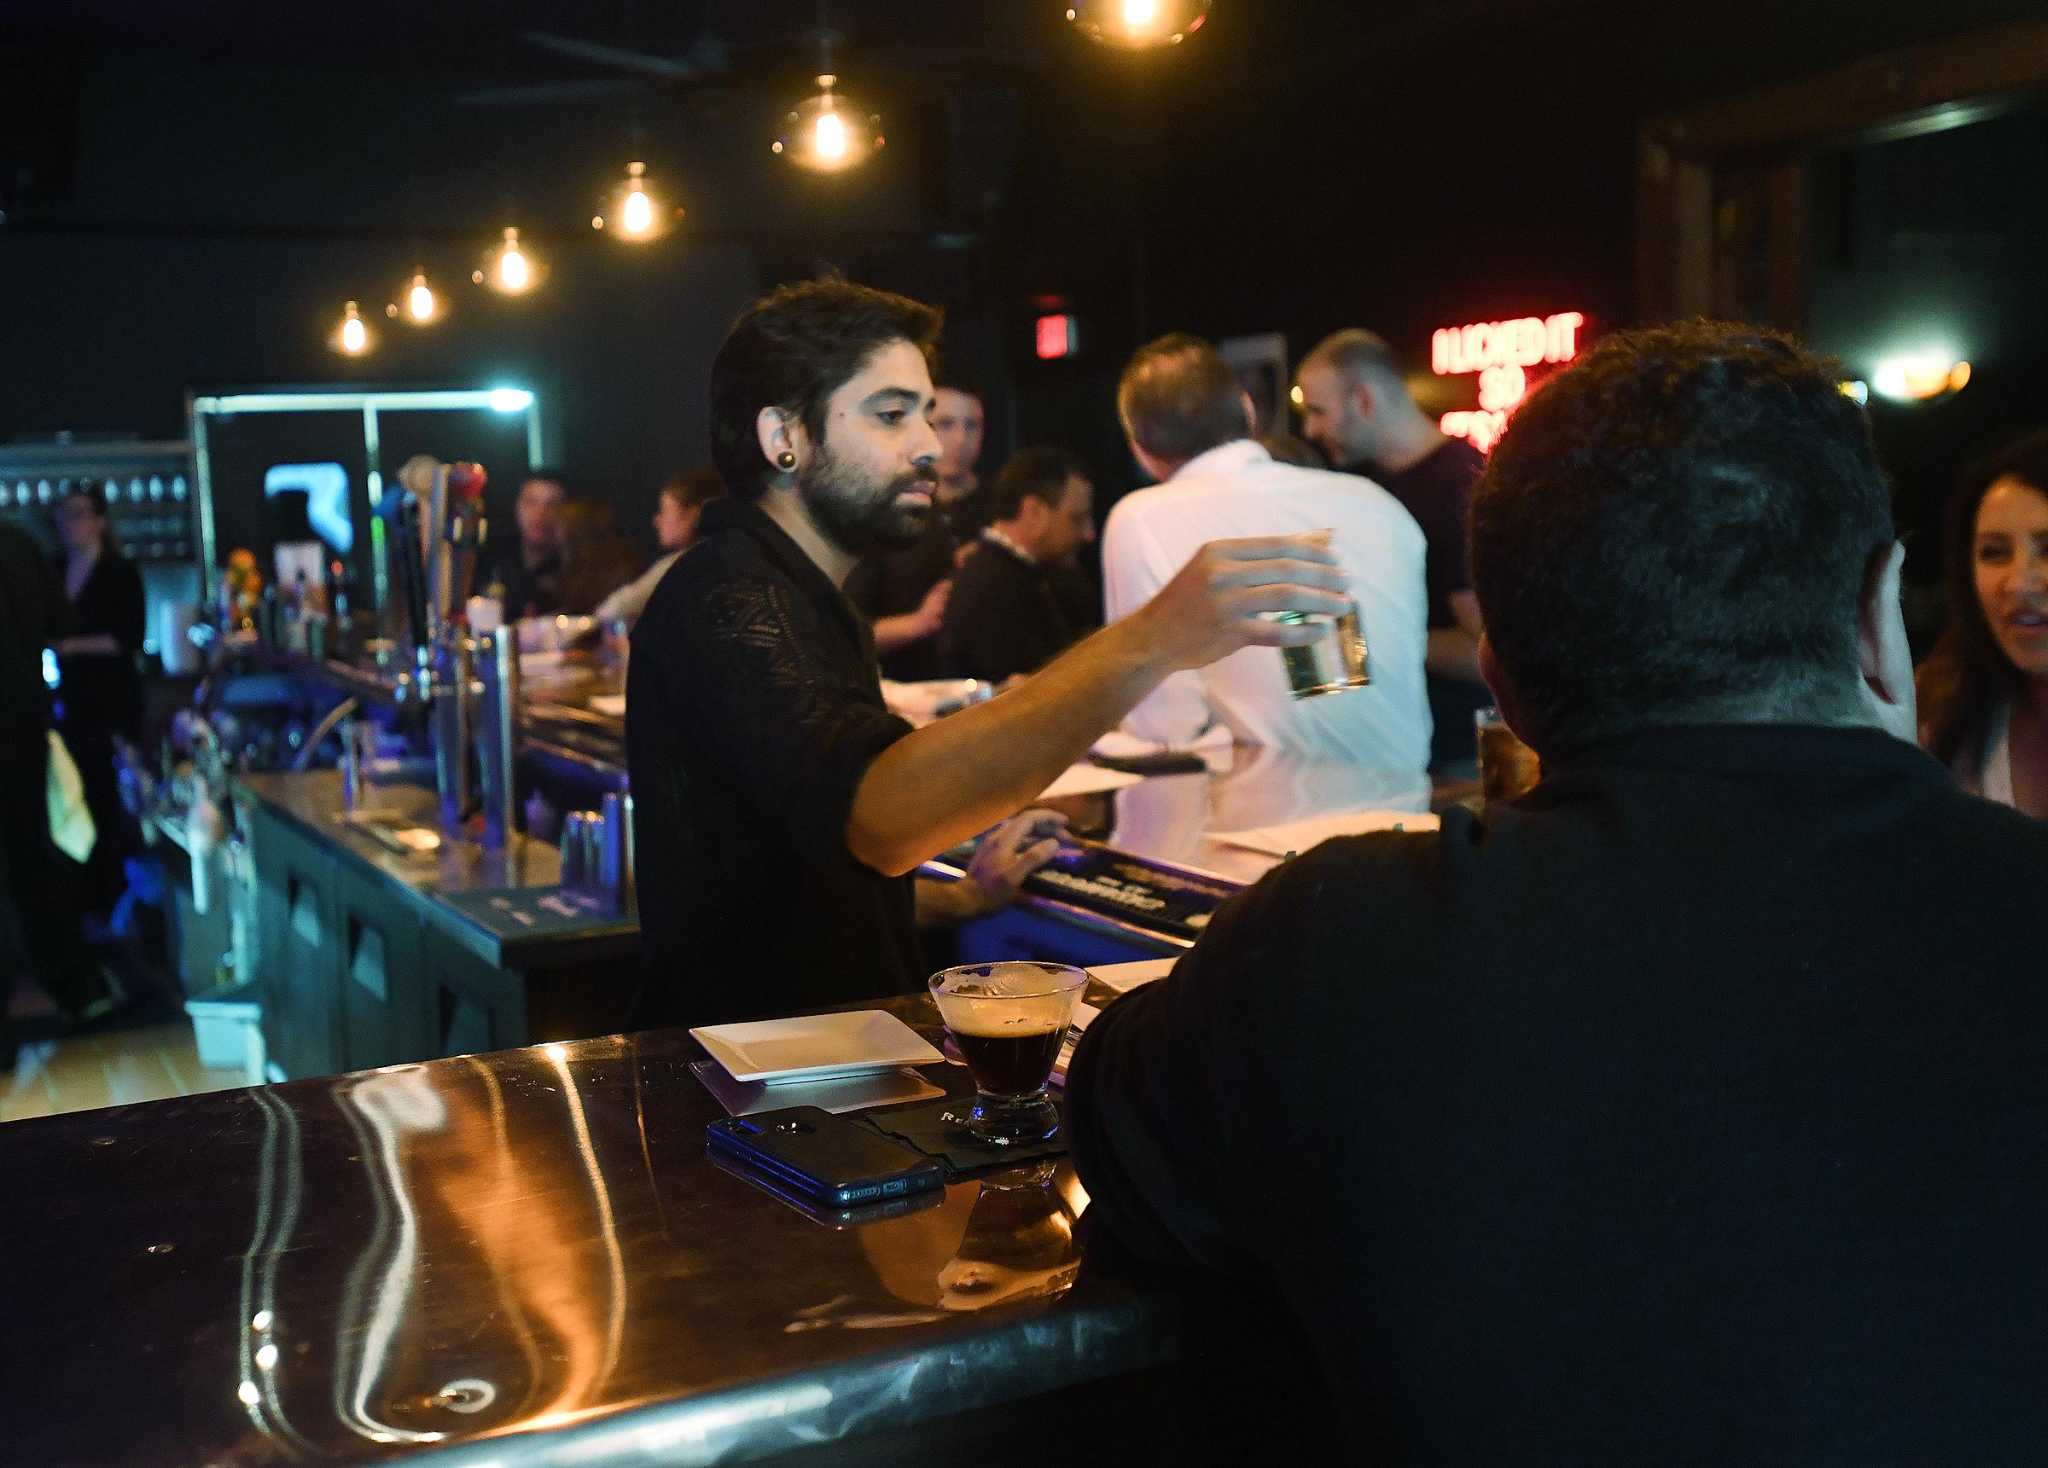 Ansonia’s Crave restaurant relaunches as Uptown Bar and Eatery